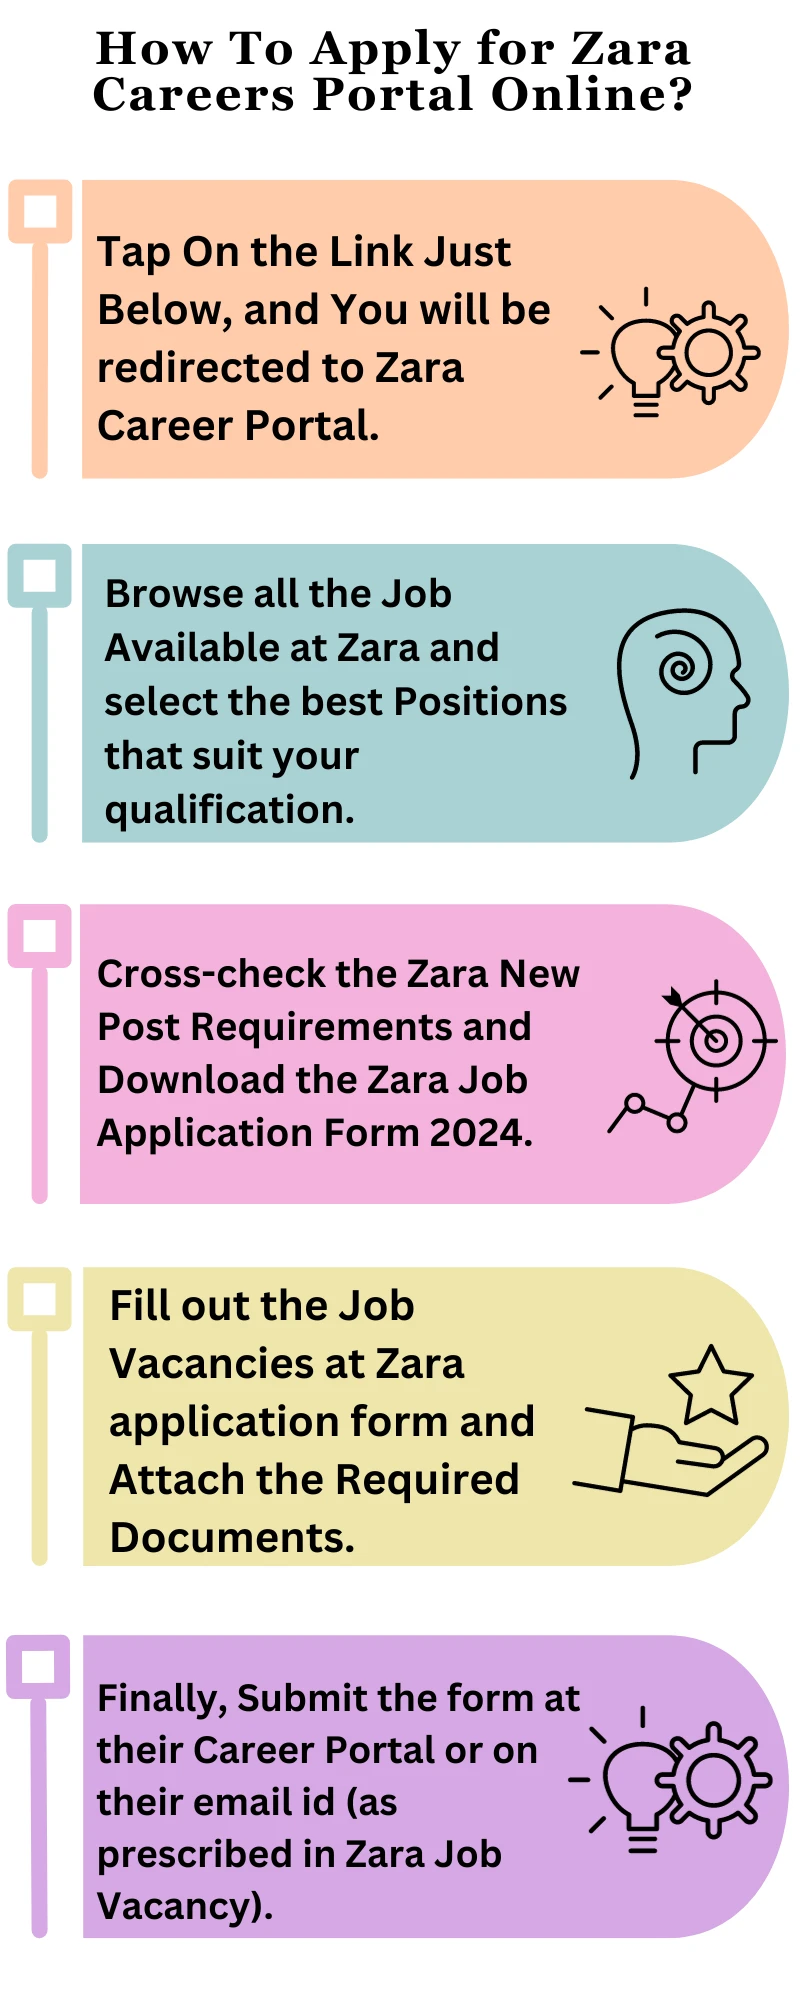 How To Apply for Zara Careers Portal Online?